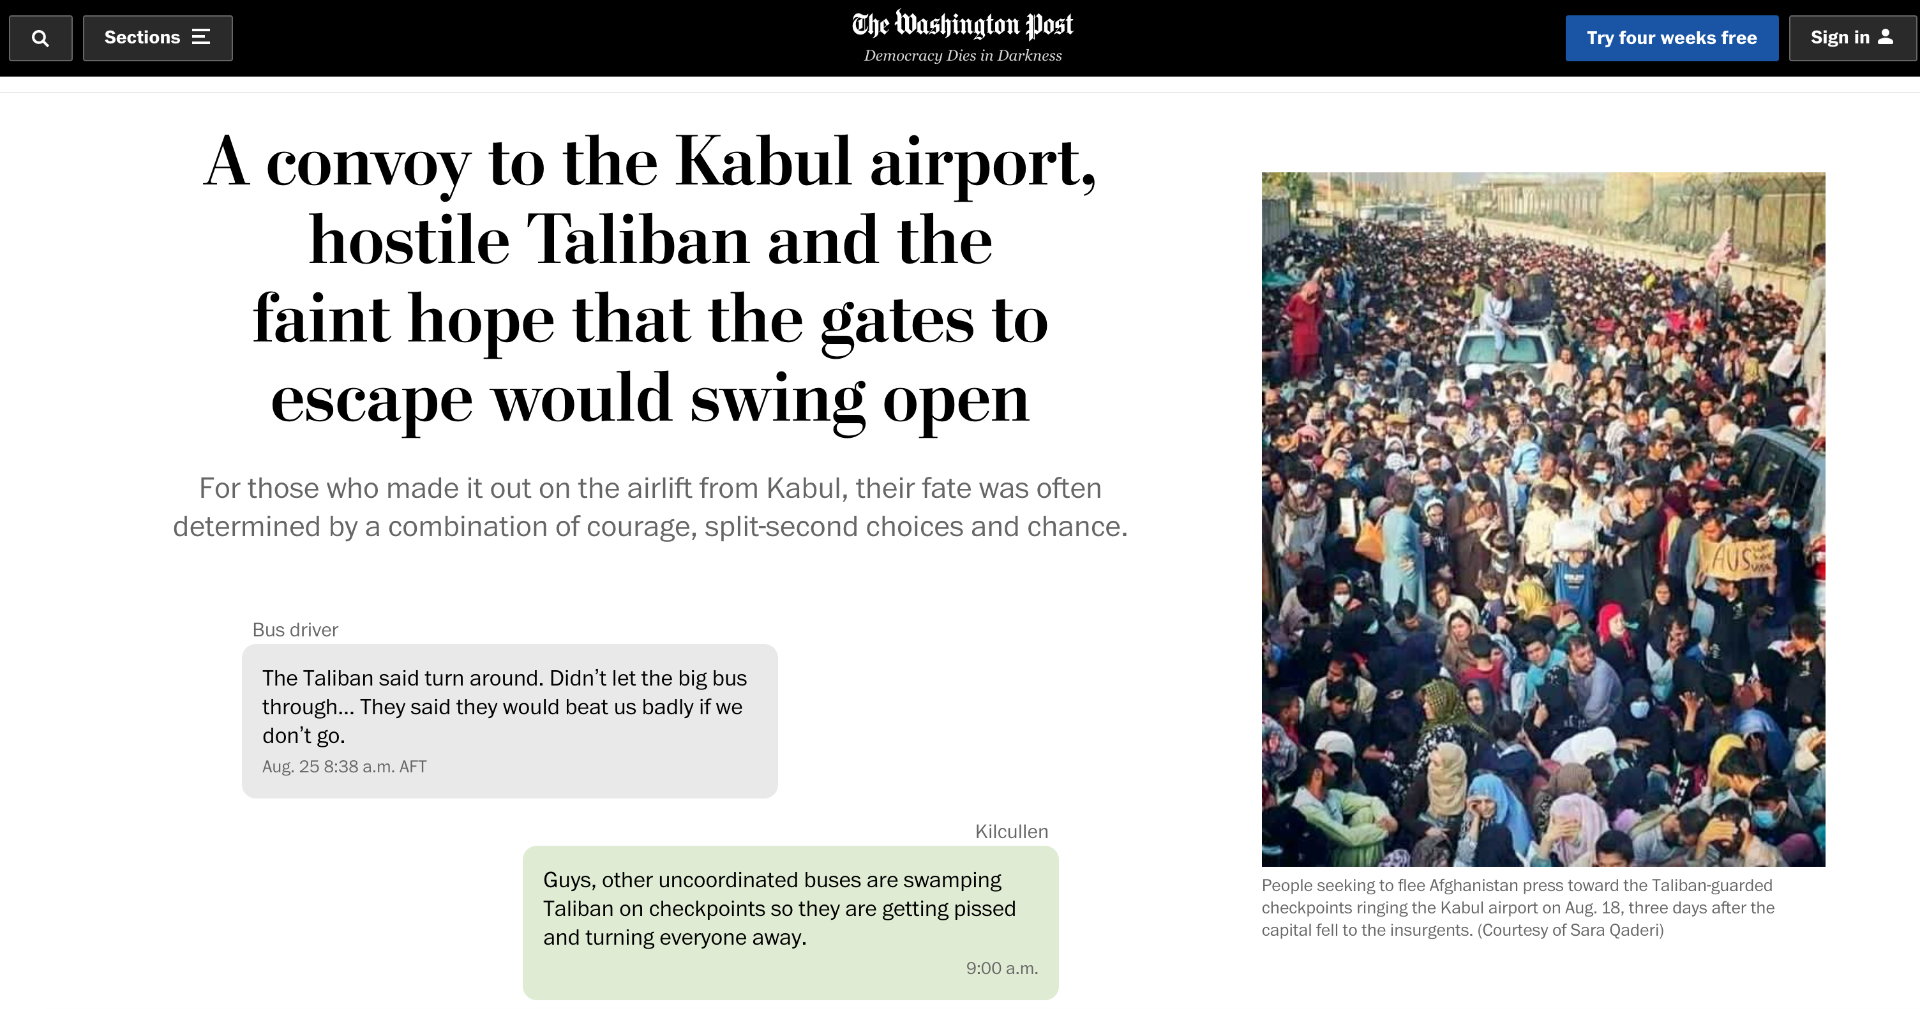 A screenshot of a digital Washington Post article. Jaffe, Greg; Witte, Griff.  “A convoy to the Kabul airport, hostile Taliban and the faint hope that the gates to escape would swing open.” The Washington Post, Sept. 10, 2021